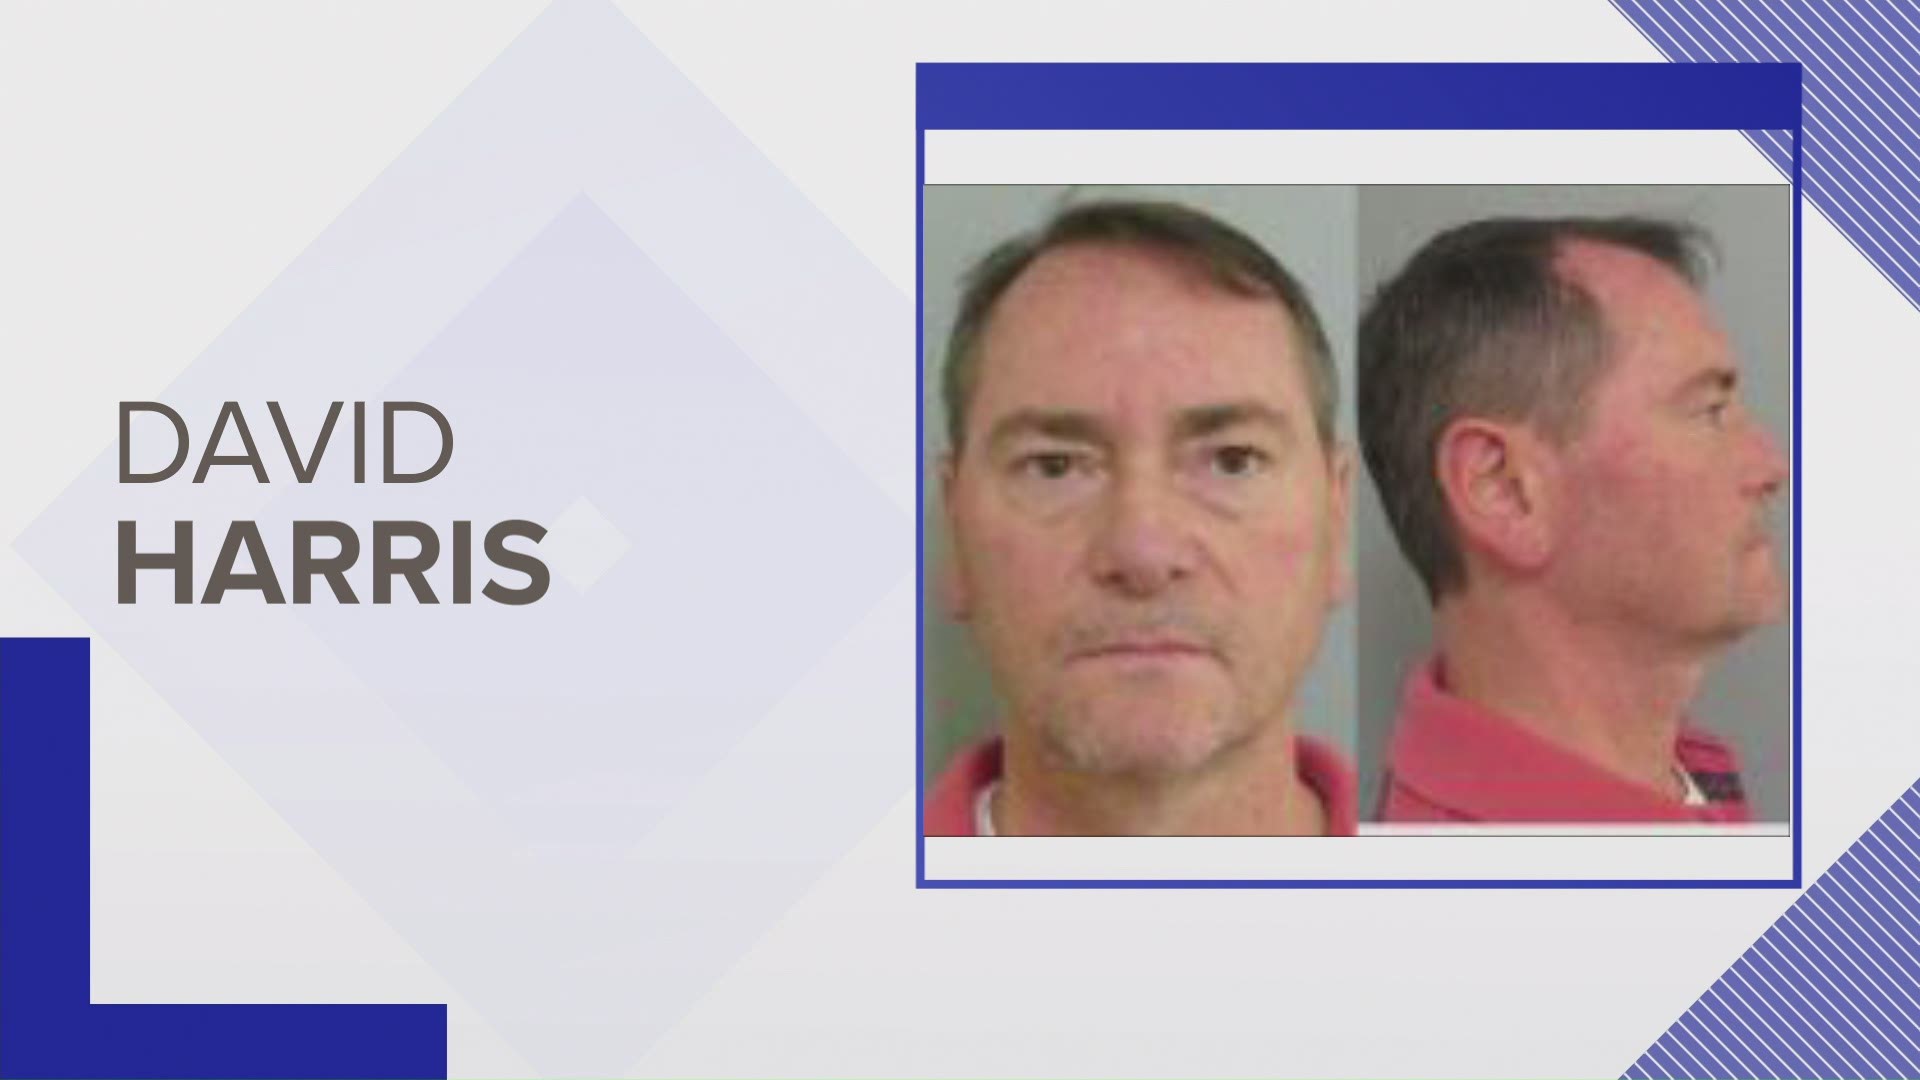 FBI Agent David Harris was arrested Thursday after several victim complaints of sexual wrongdoing in three parishes.